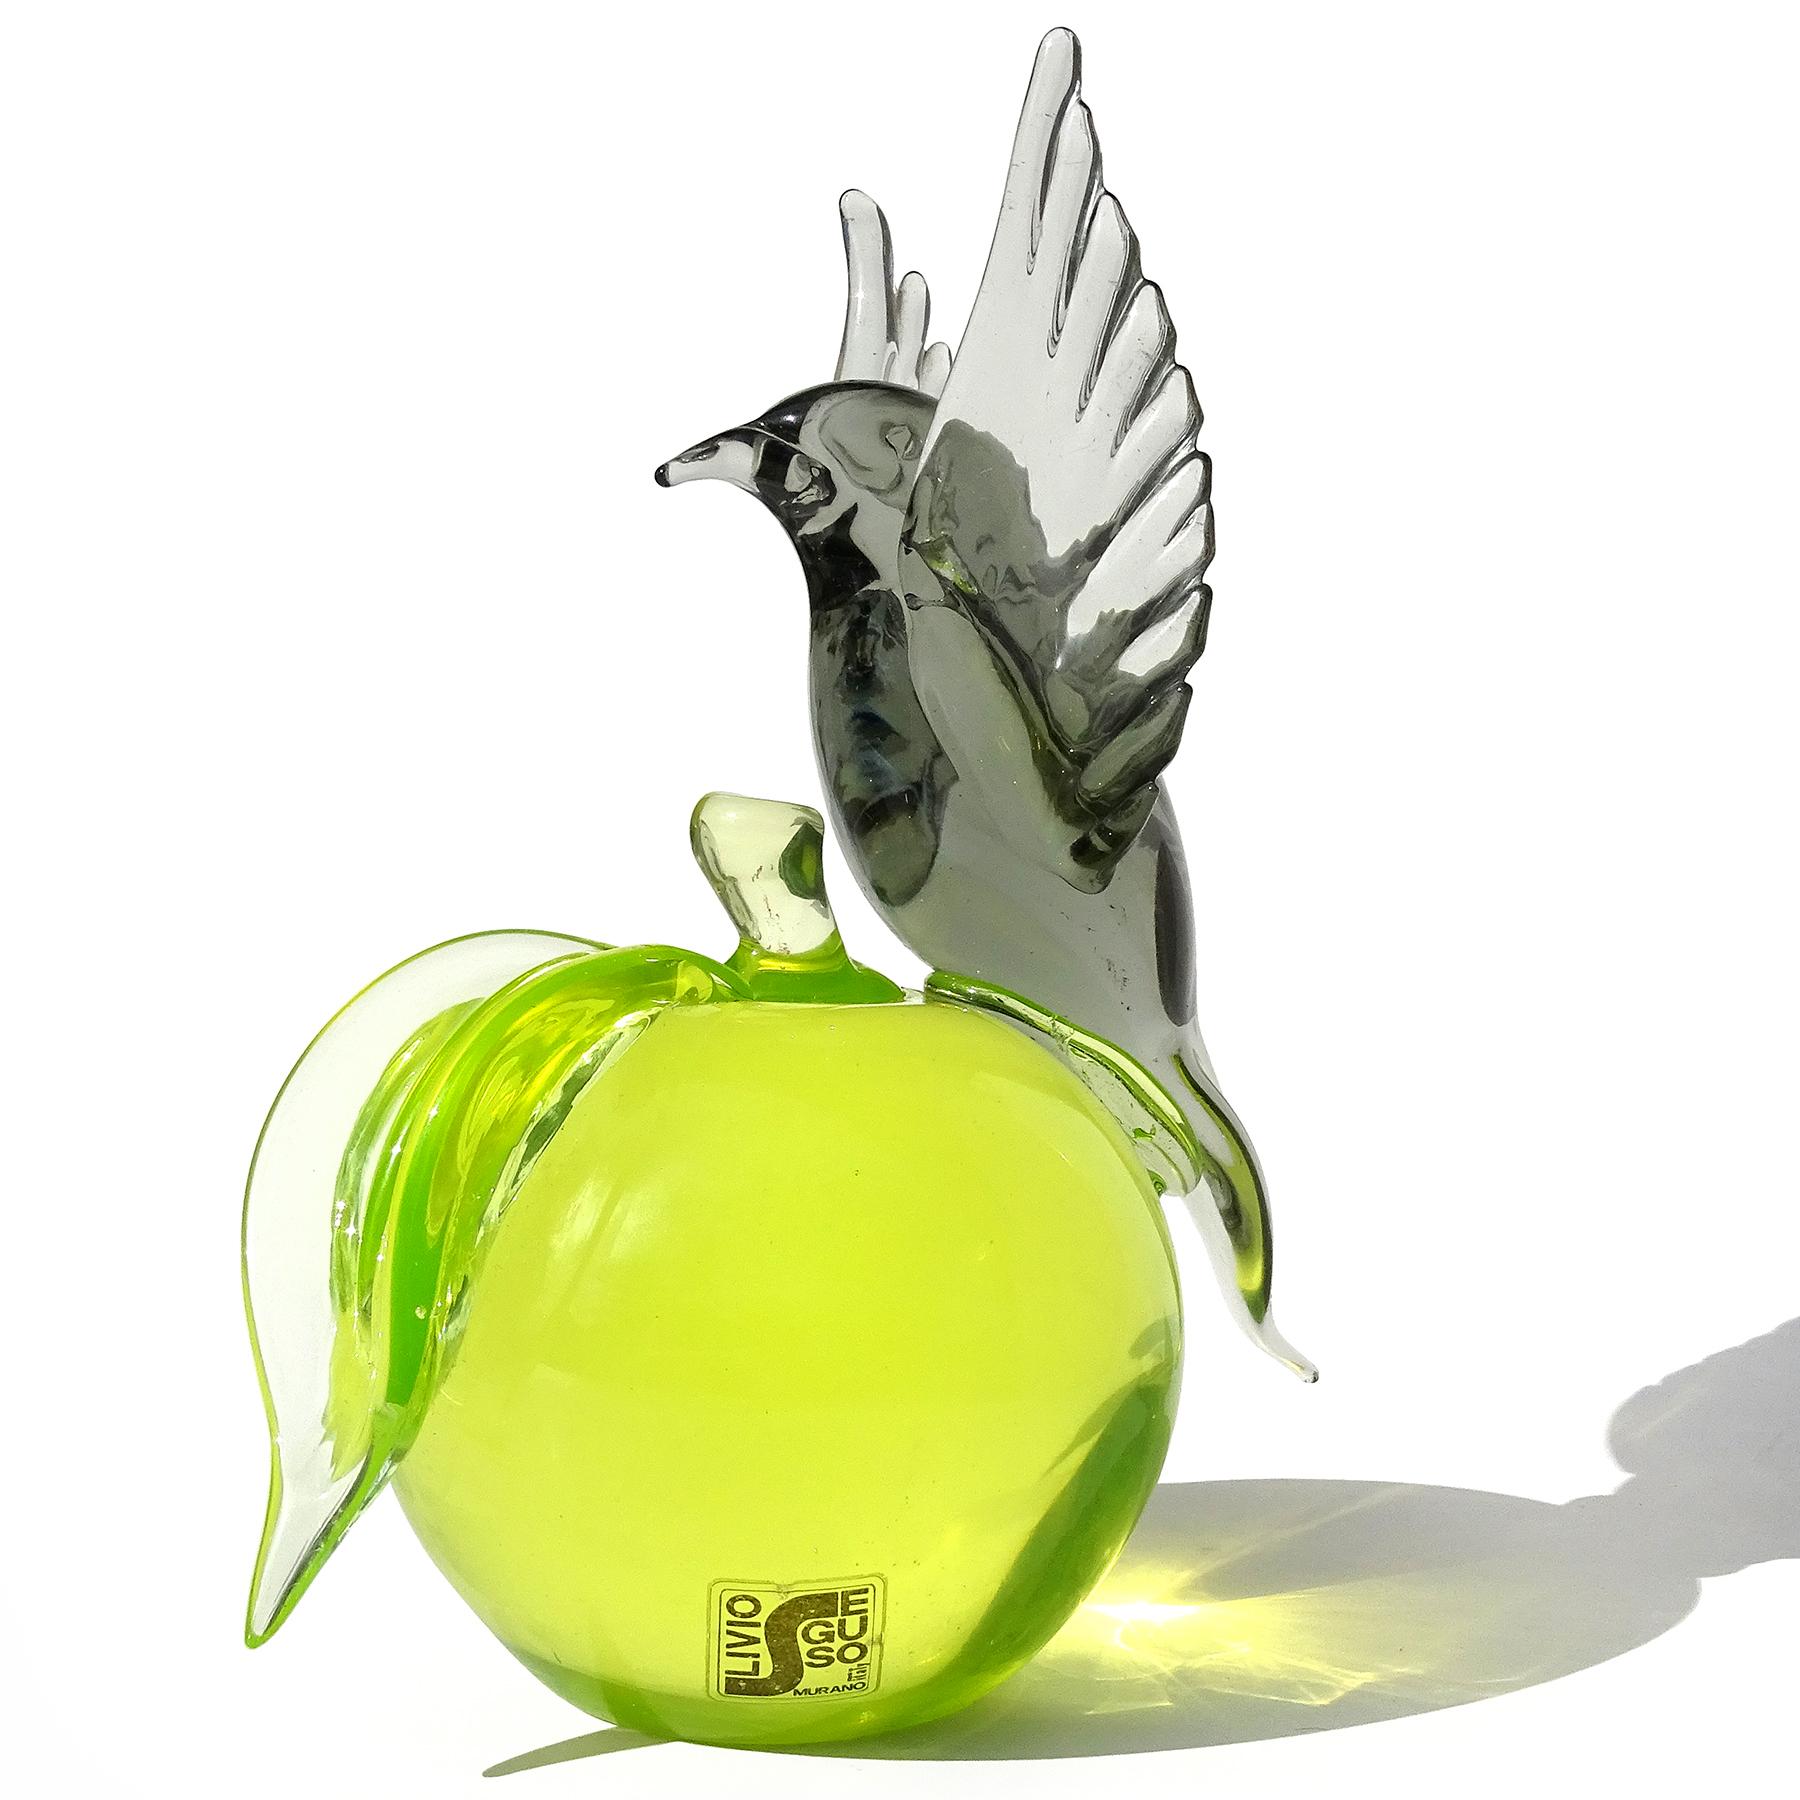 Beautiful, large vintage Murano hand blown Sommerso glowing Uranium green apple with gray bird Italian art glass sculpture. Documented to designer Livio Seguso, with original label still attached. The clear label reads 